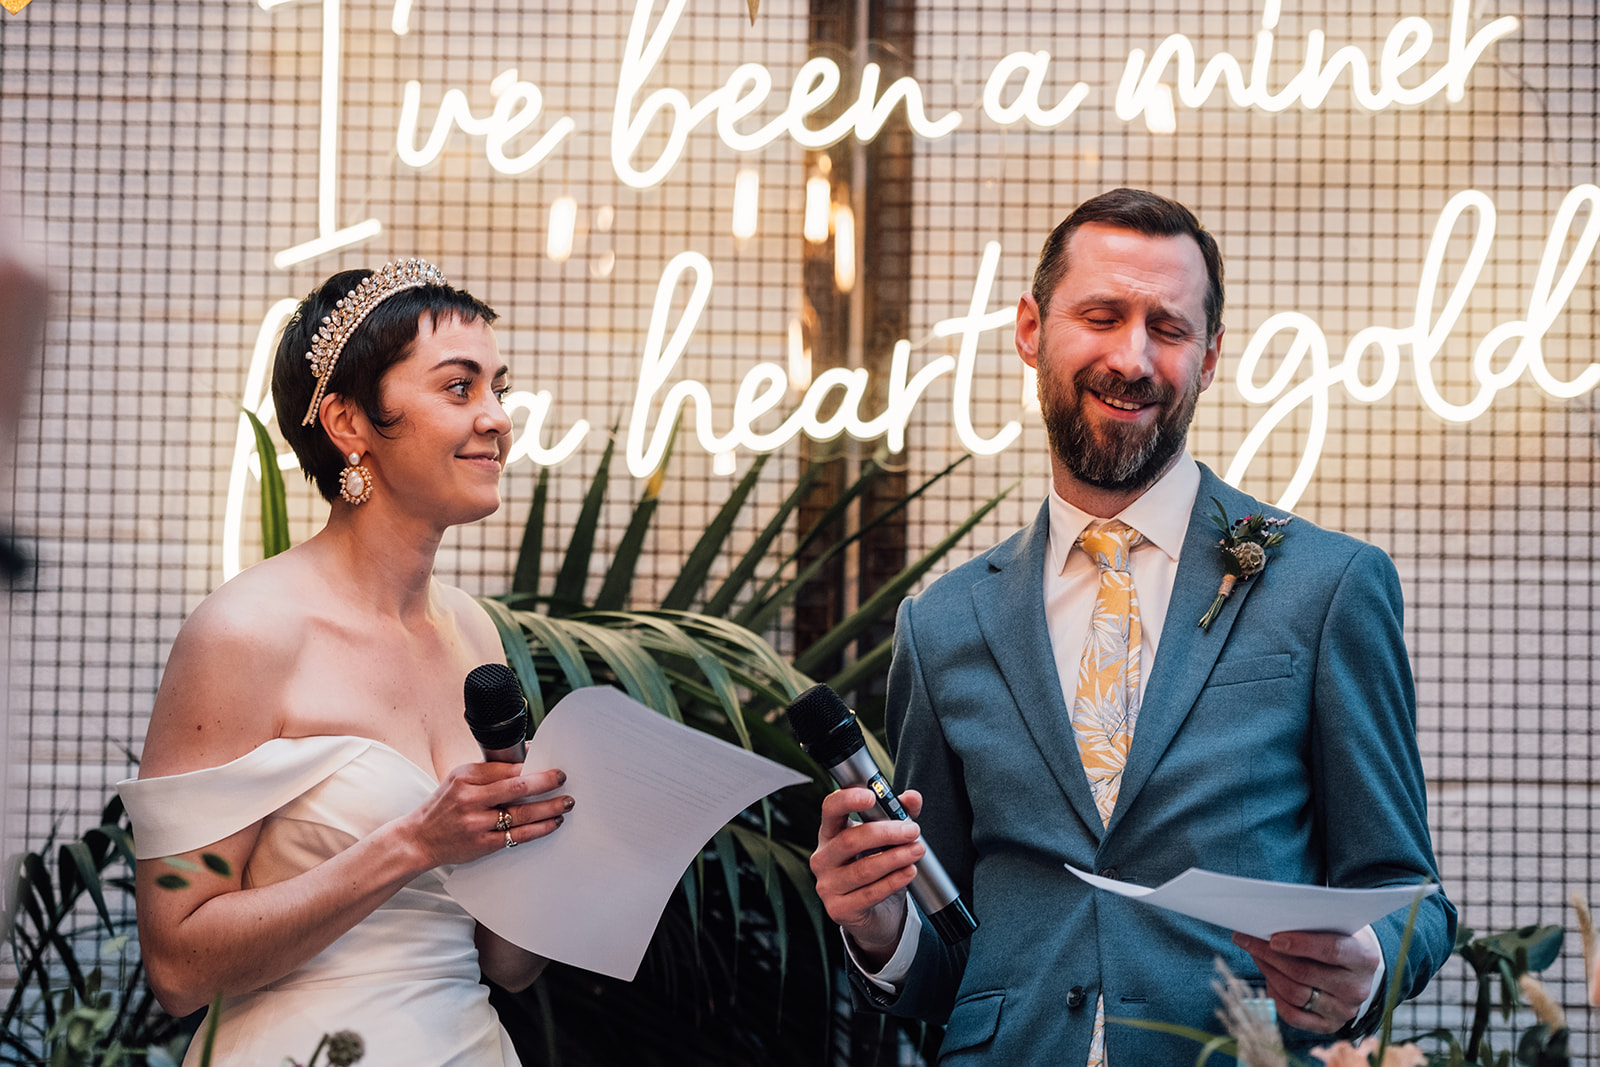 Newlyweds giving a speech at their wedding - image by Emis Weddings